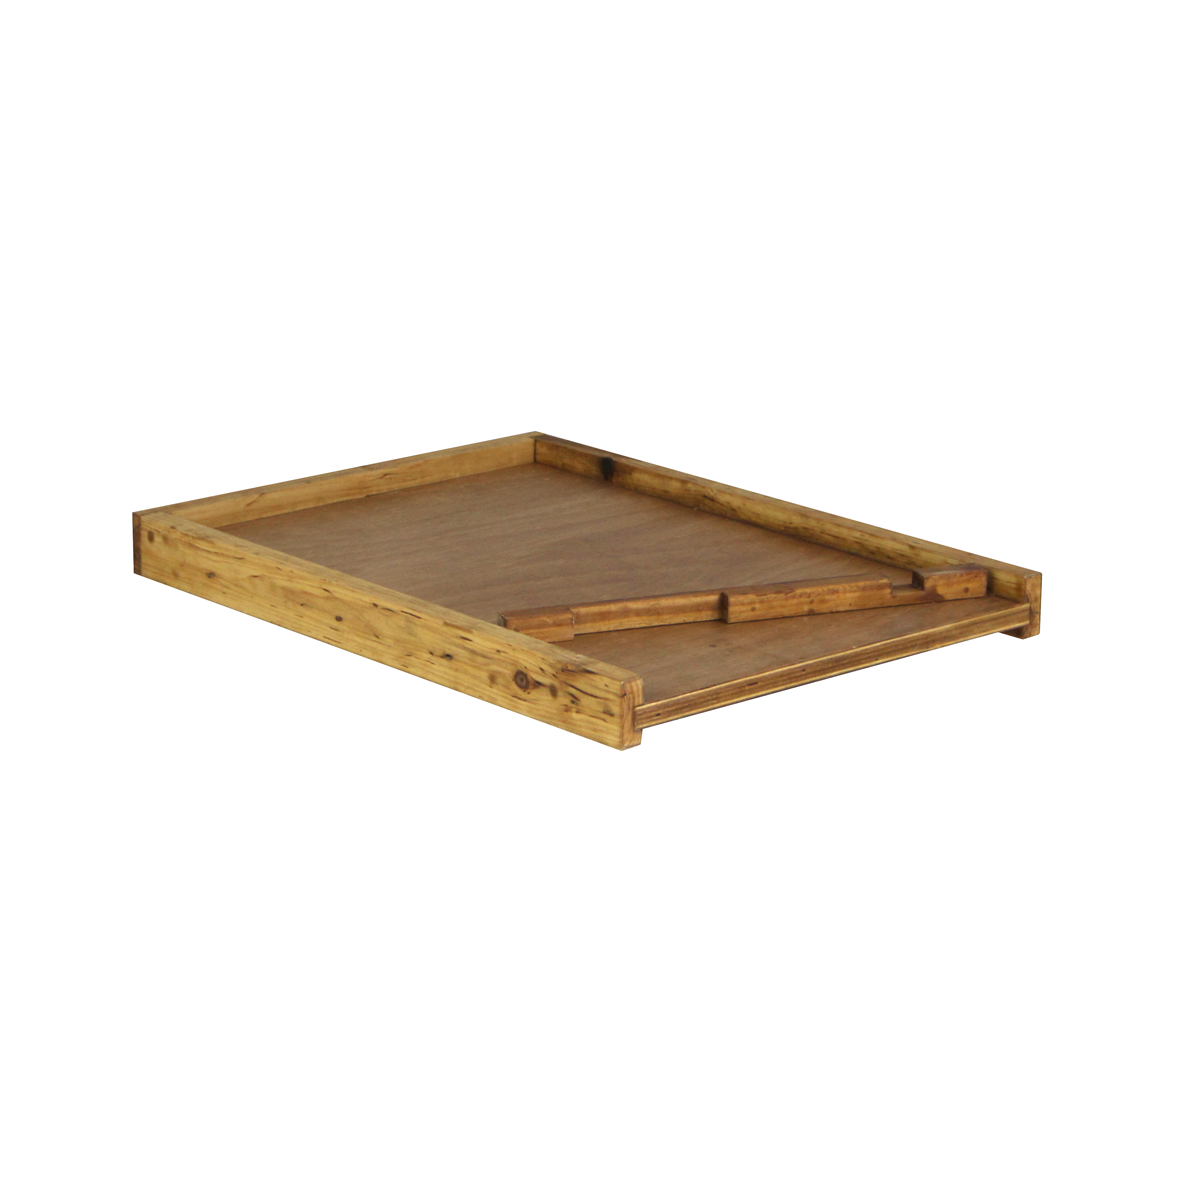 Hoover Hives Wax Coated 10 Frame Solid Bottom Board With Entrance Reducer